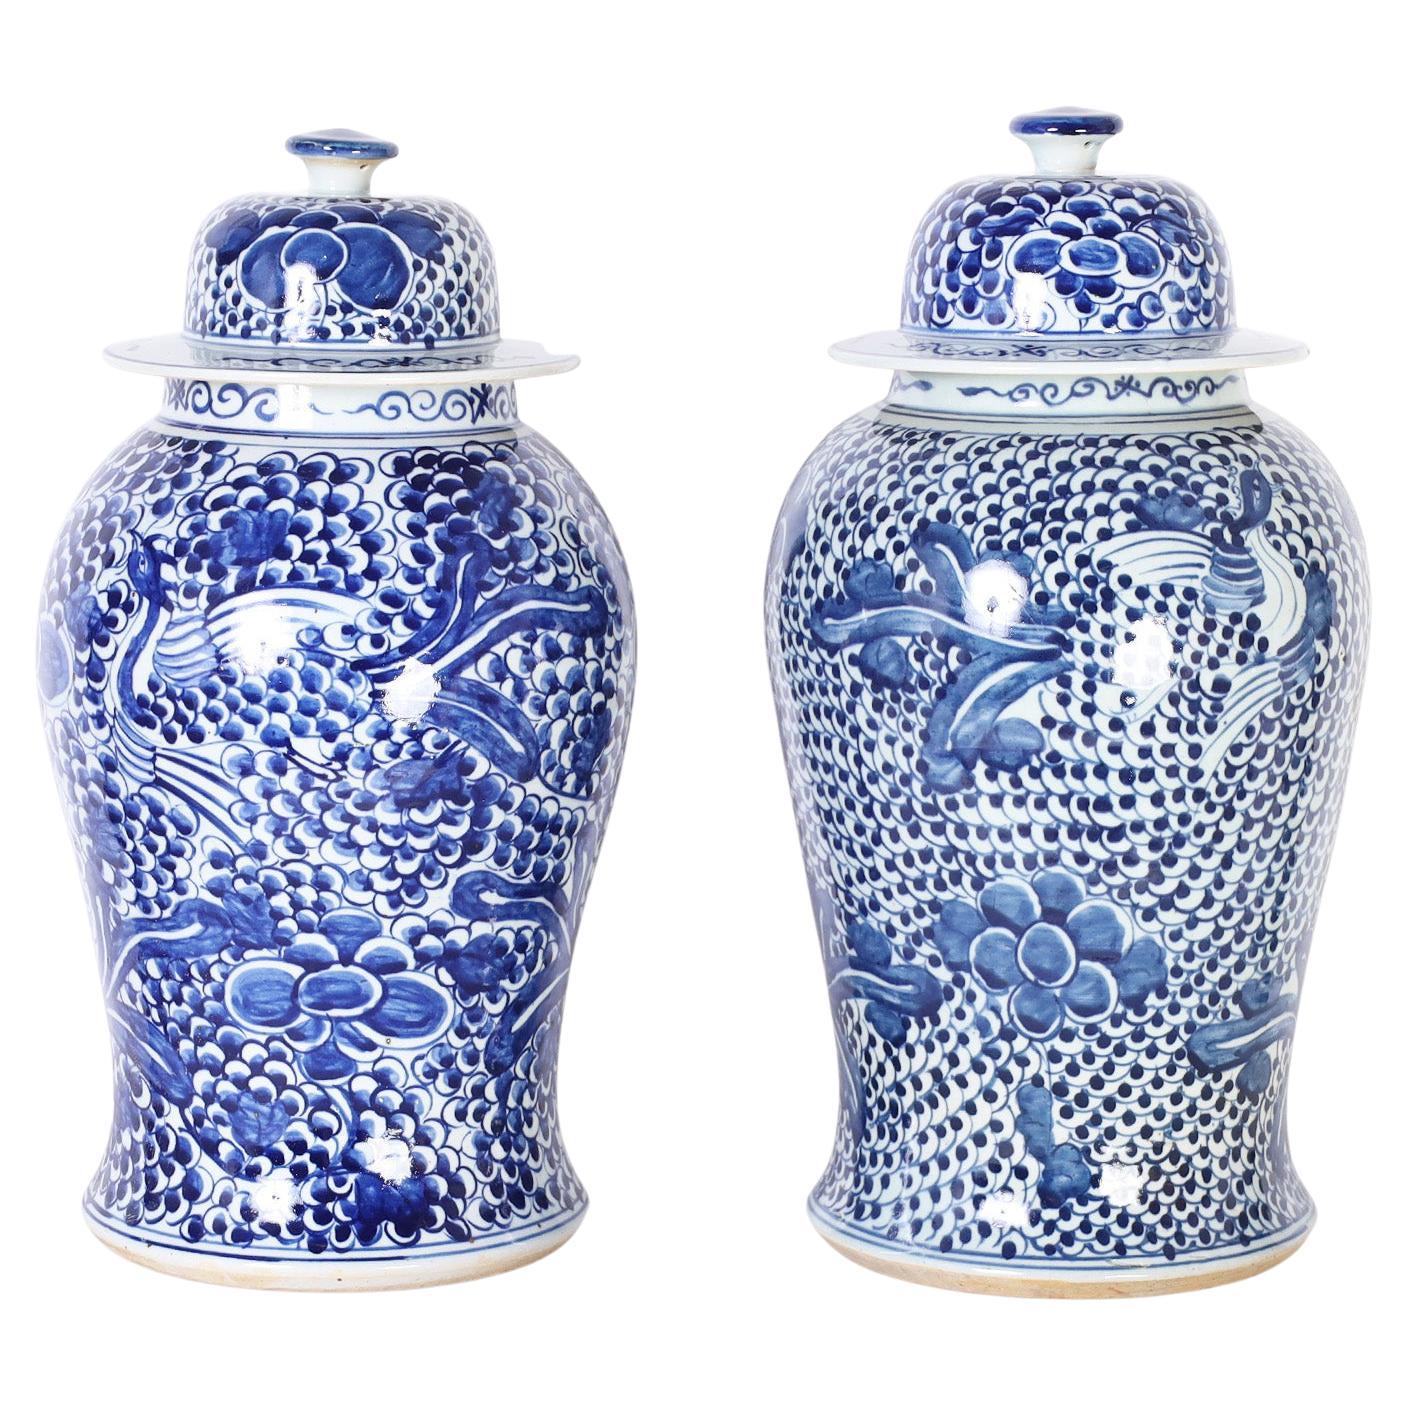 Pair of Blue and White Porcelain Lidded Ginger Jars with Birds & Flowers